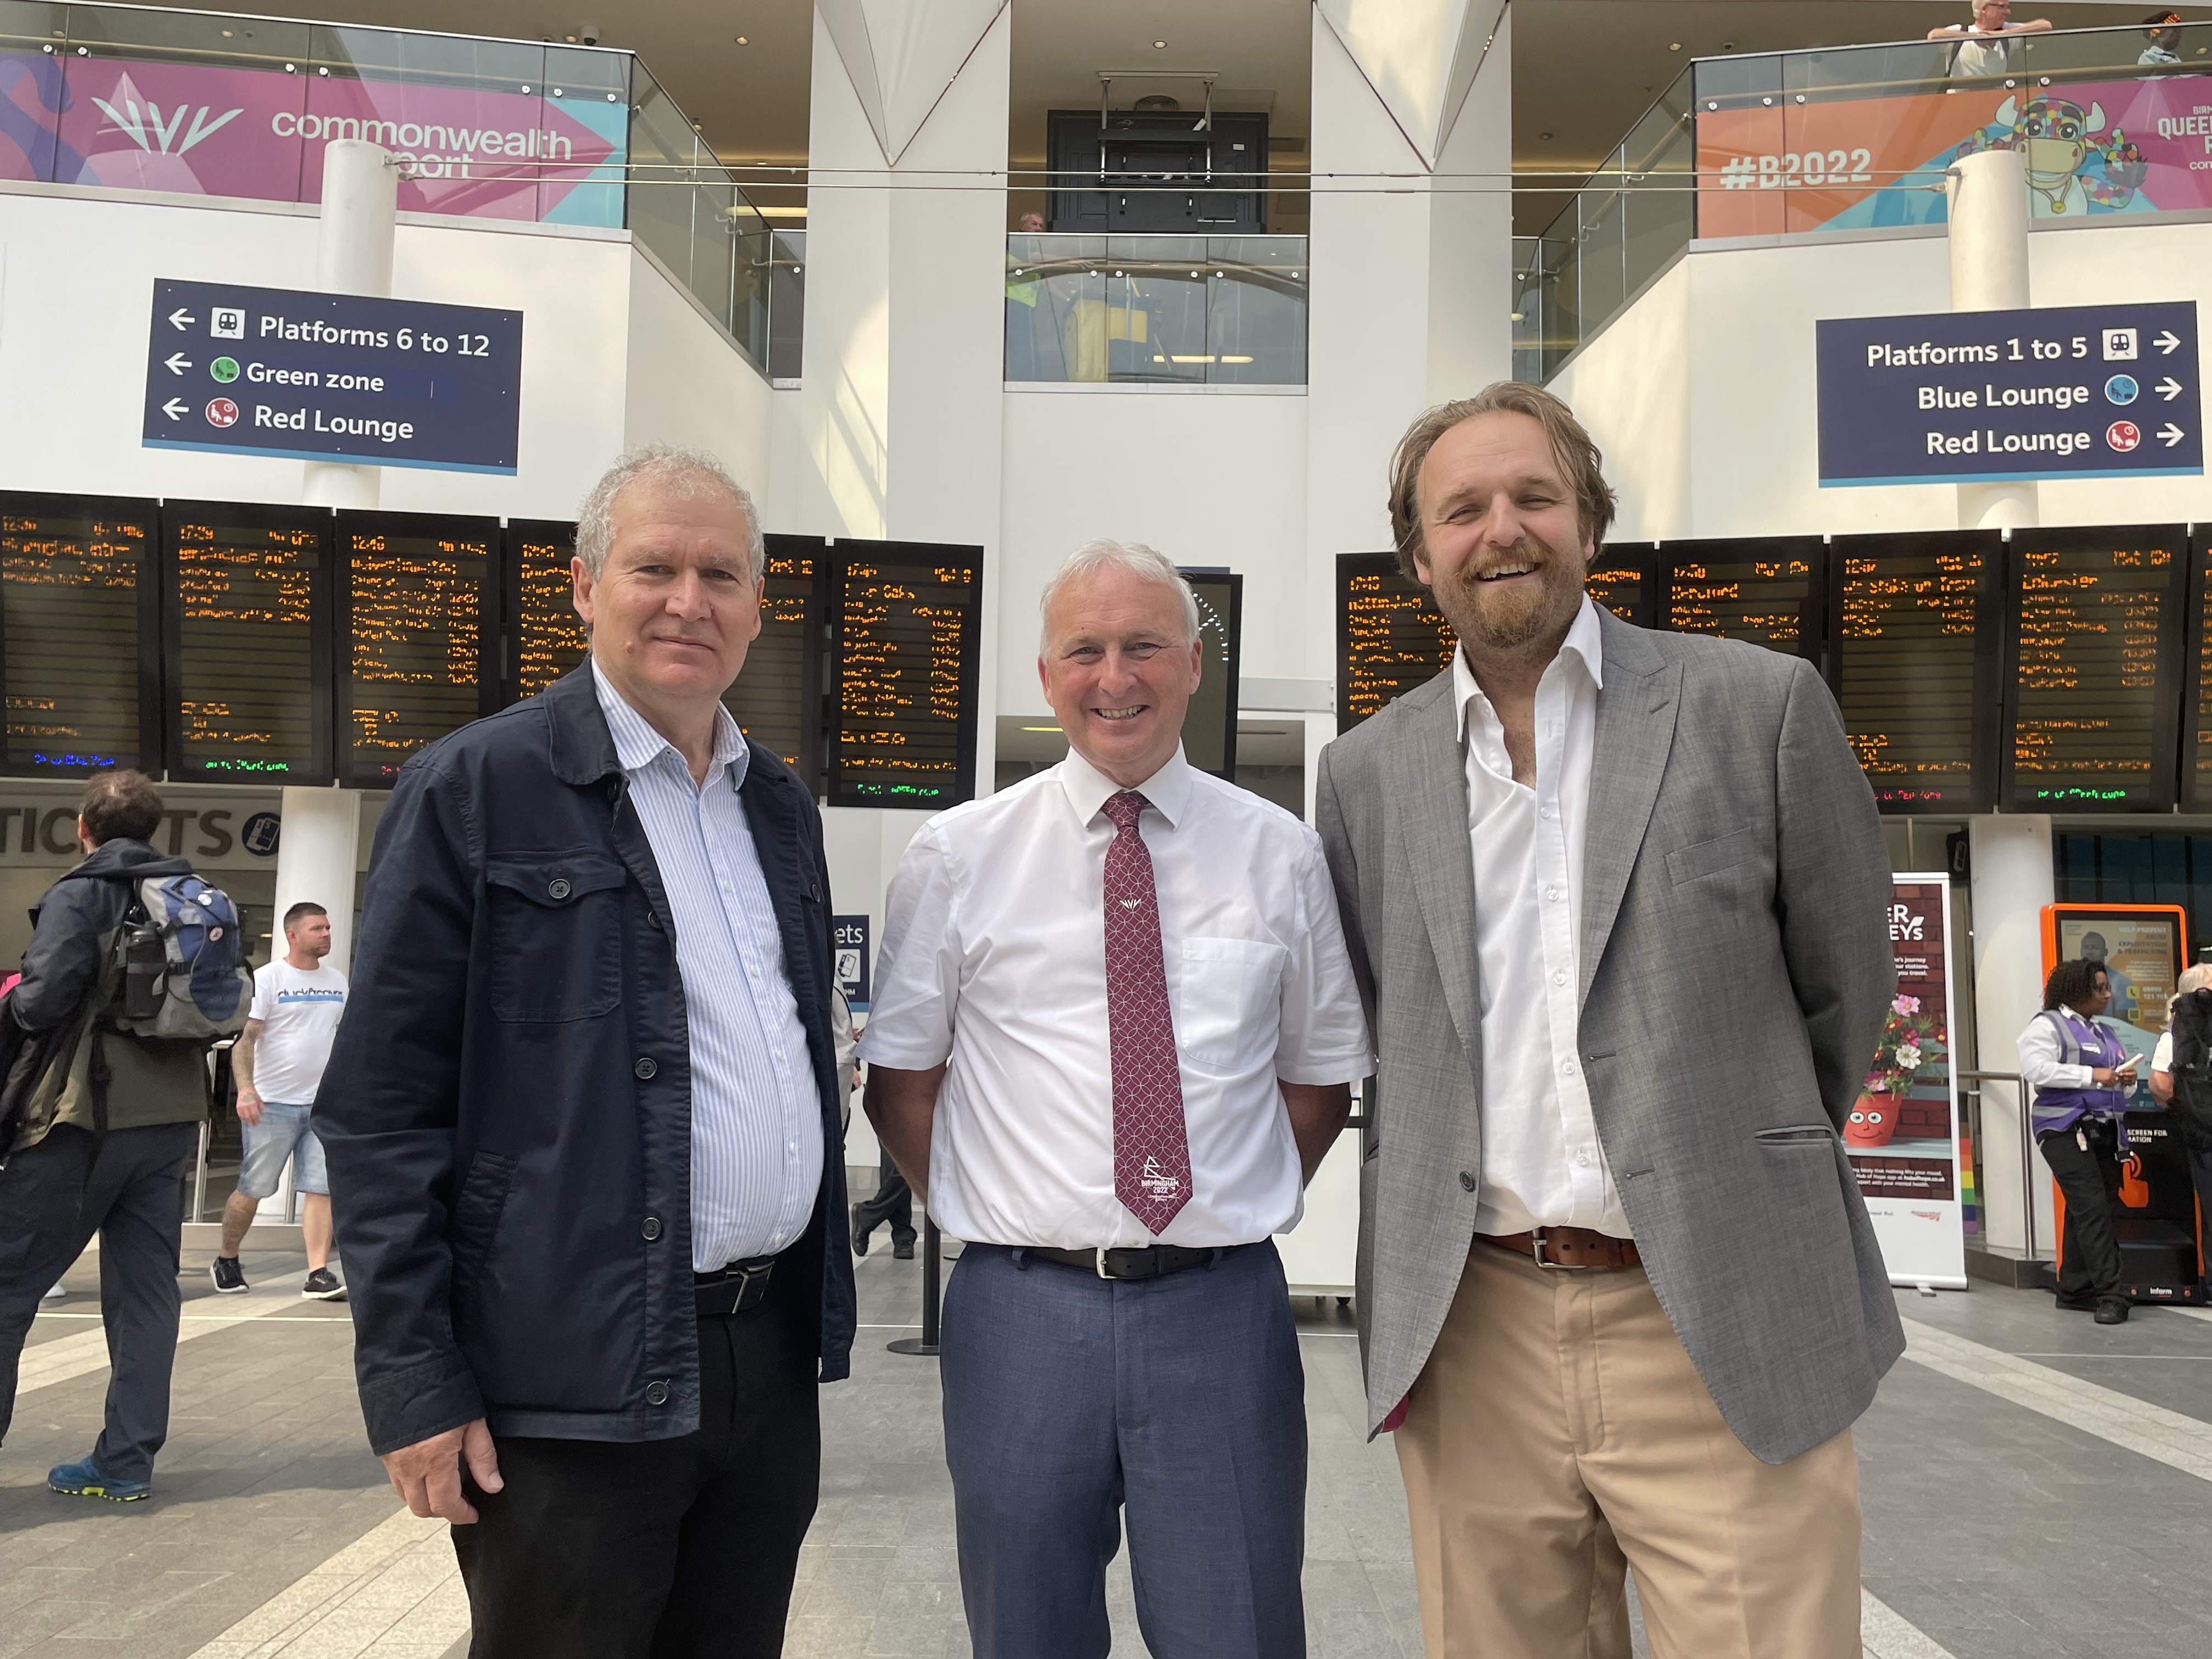 Three politicians standing in New Street station